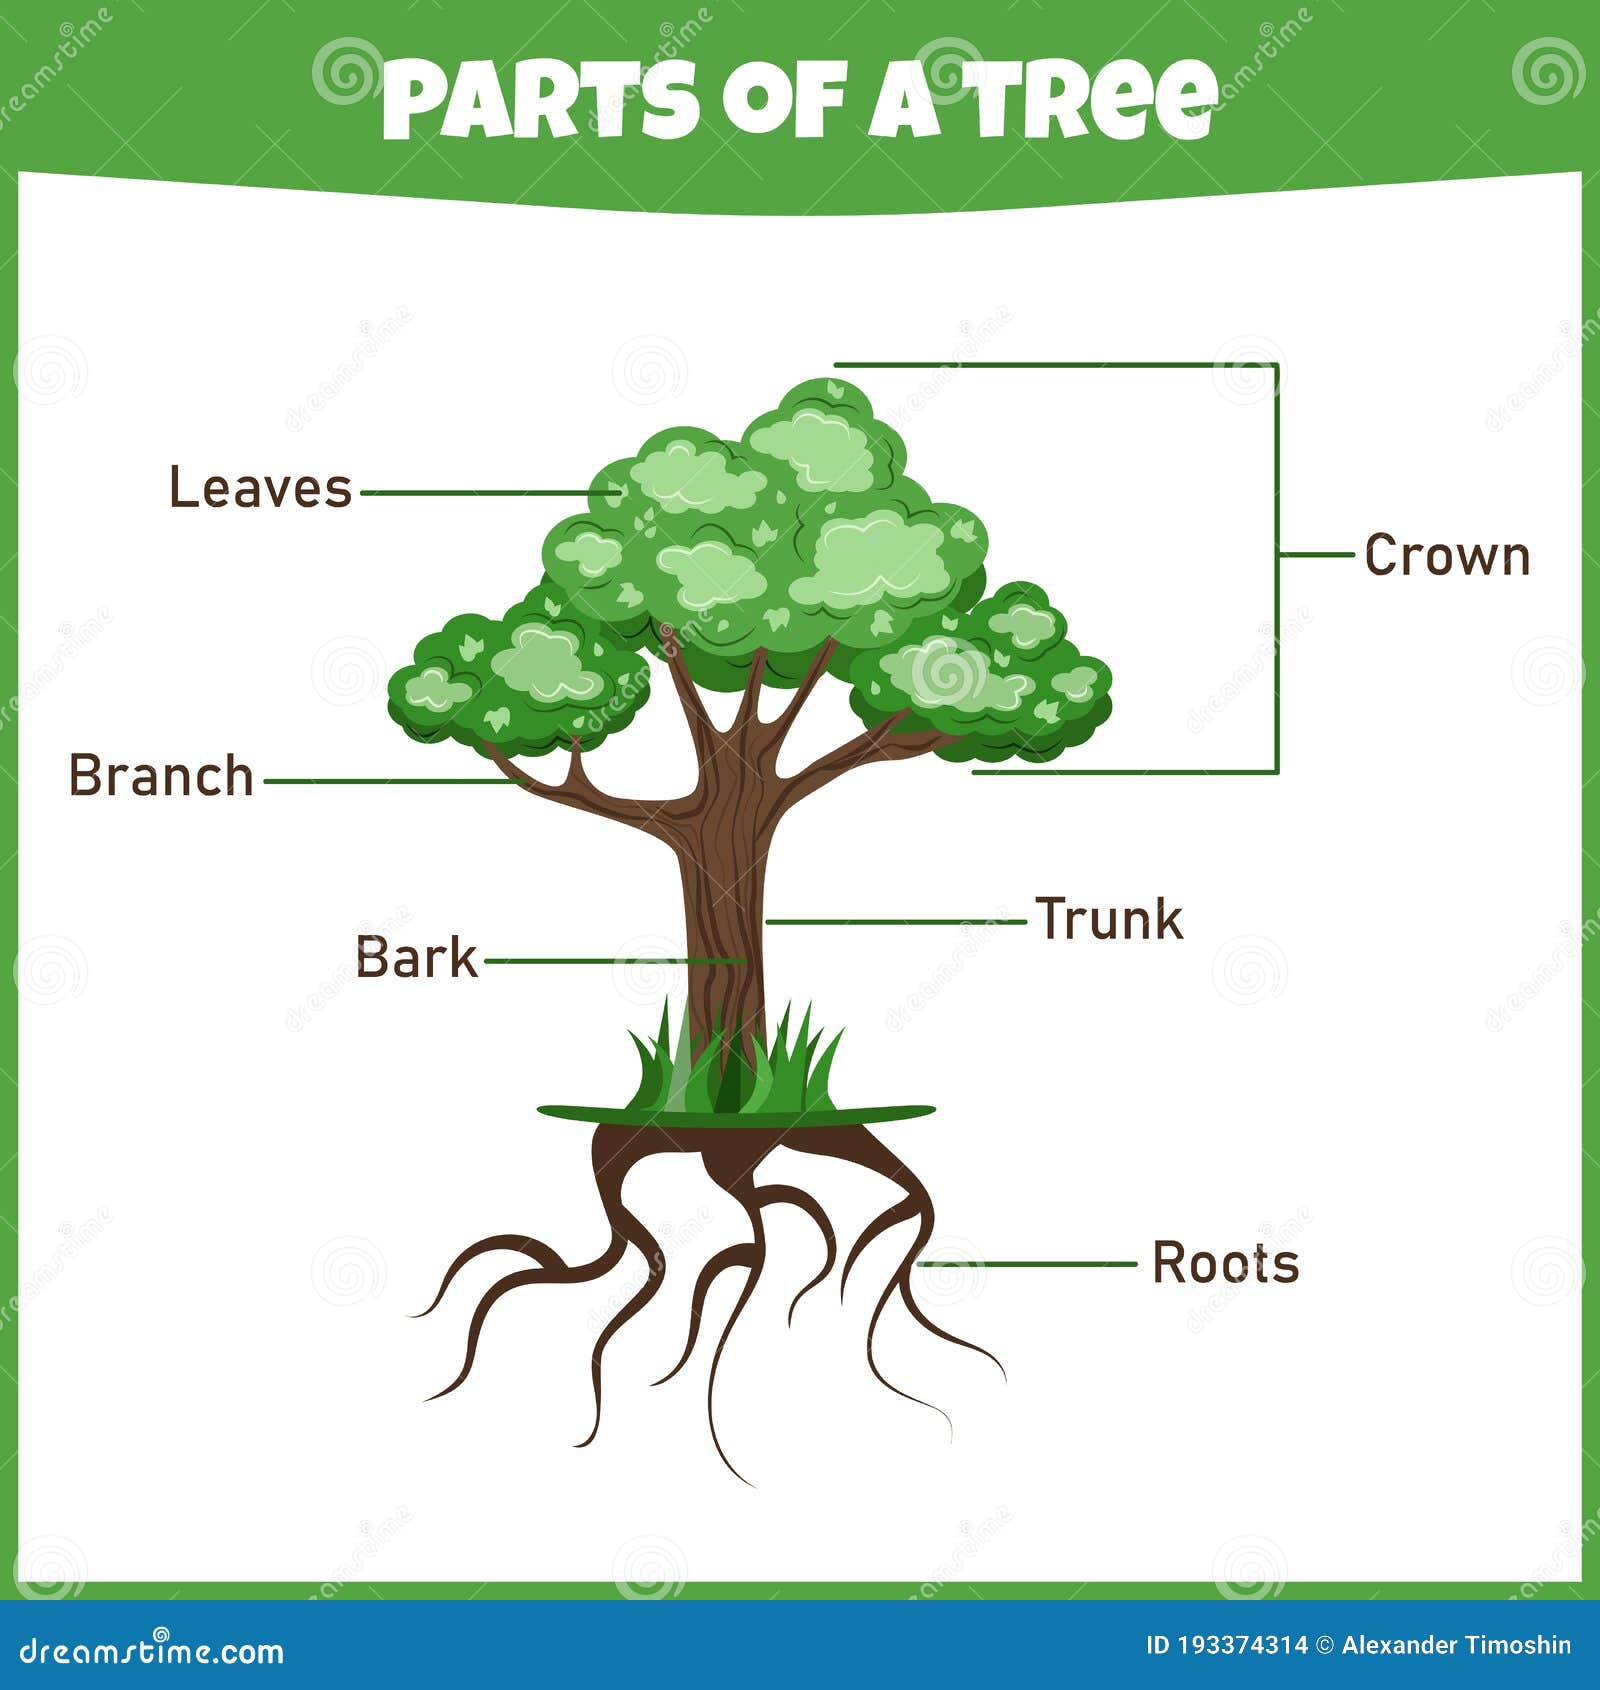 Learning Parts of a Tree. Education Worksheet. Stock Vector Throughout Parts Of A Tree Worksheet